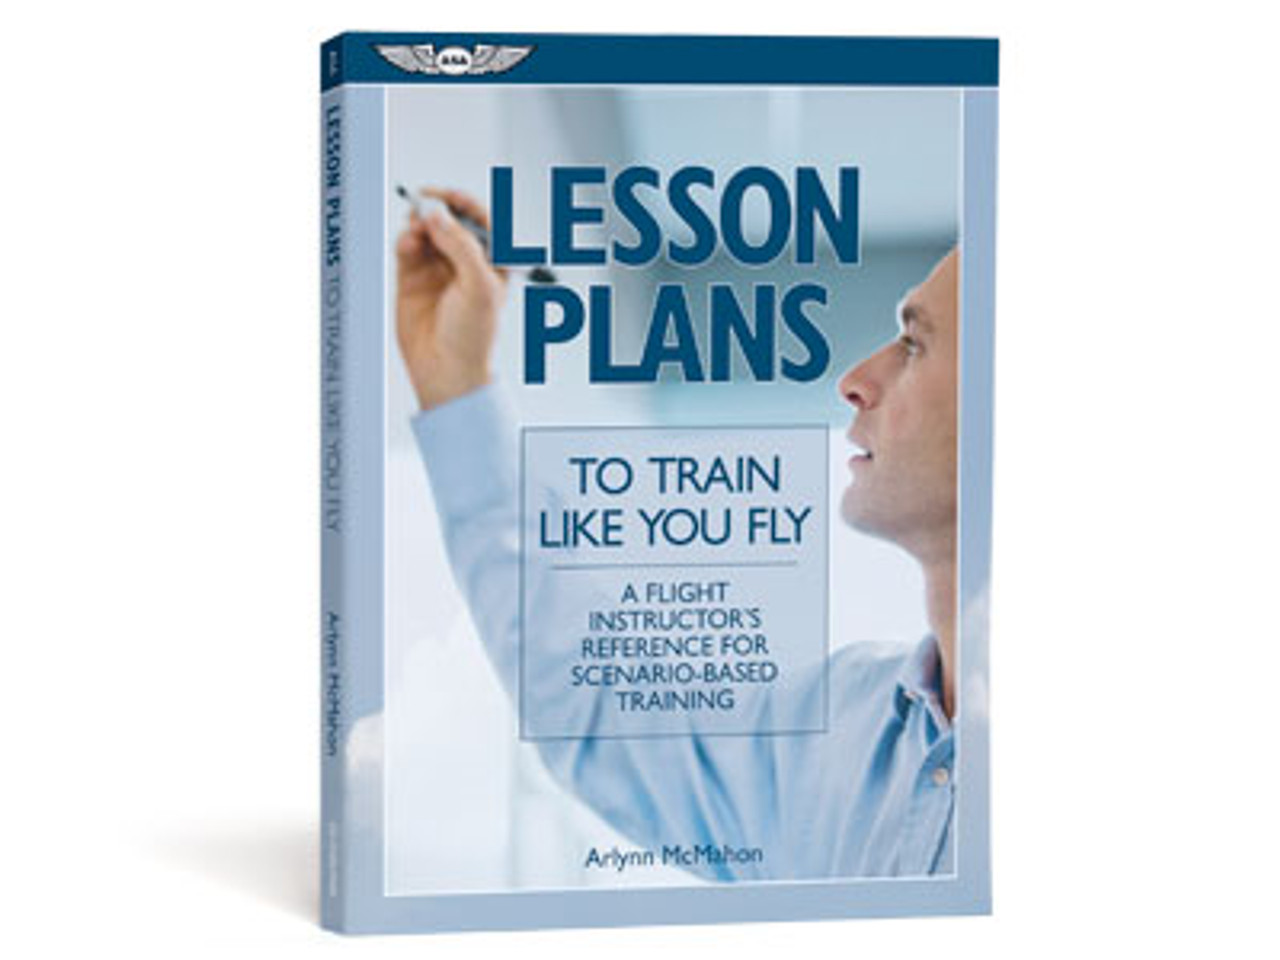 ASA Lesson Plans to Train Like You Fly